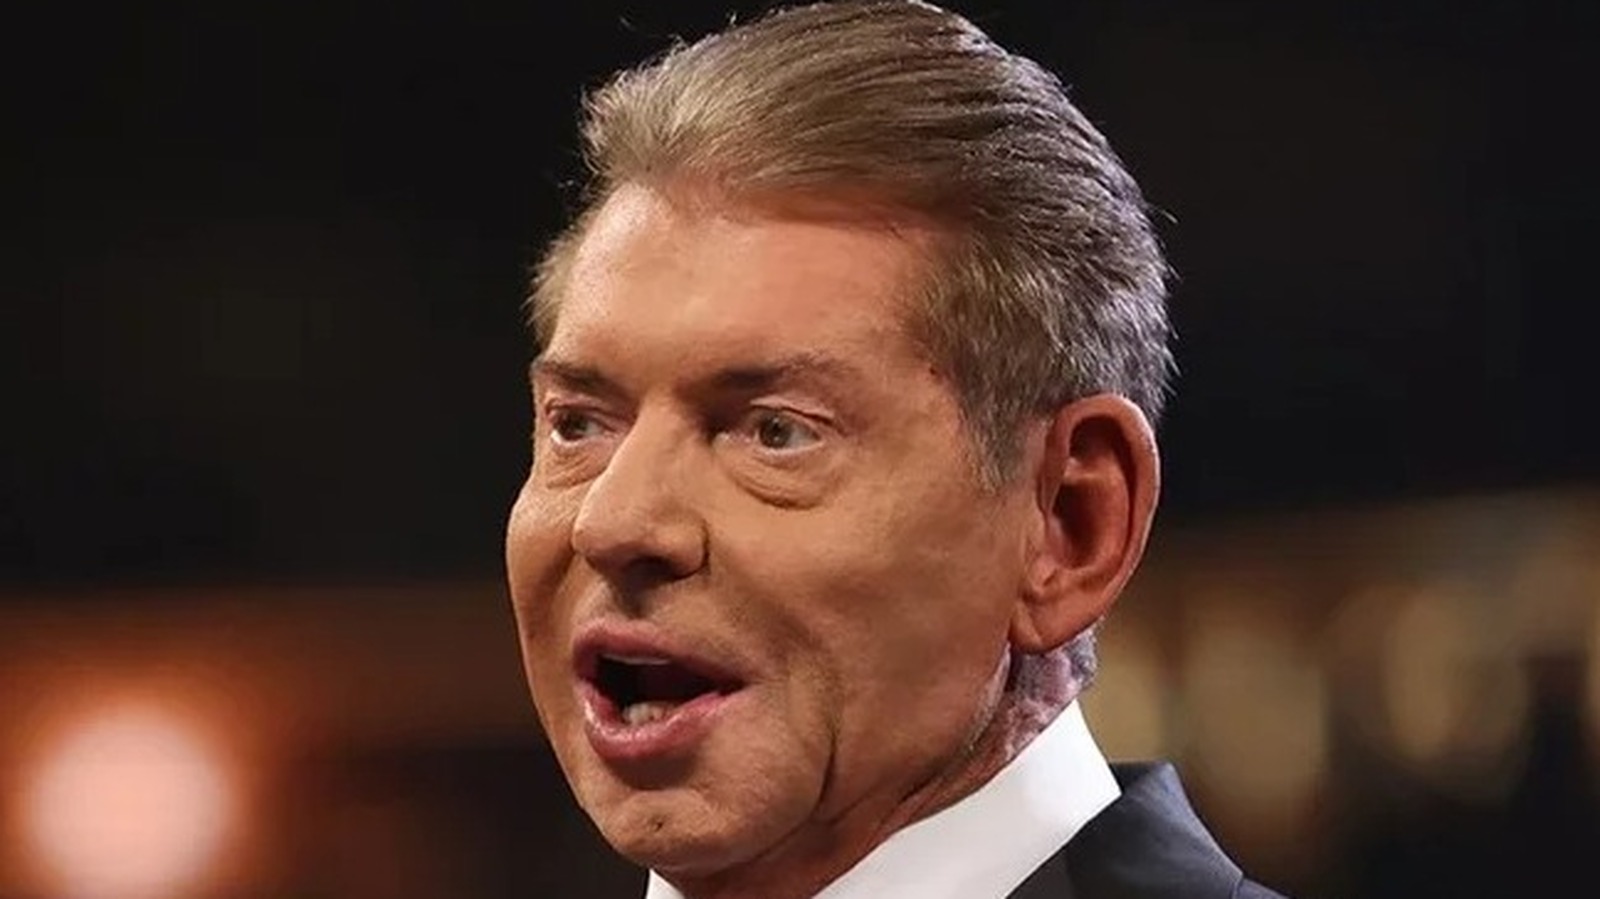 WWE Royal Rumble Reportedly Less Chaotic Without Vince McMahon Backstage